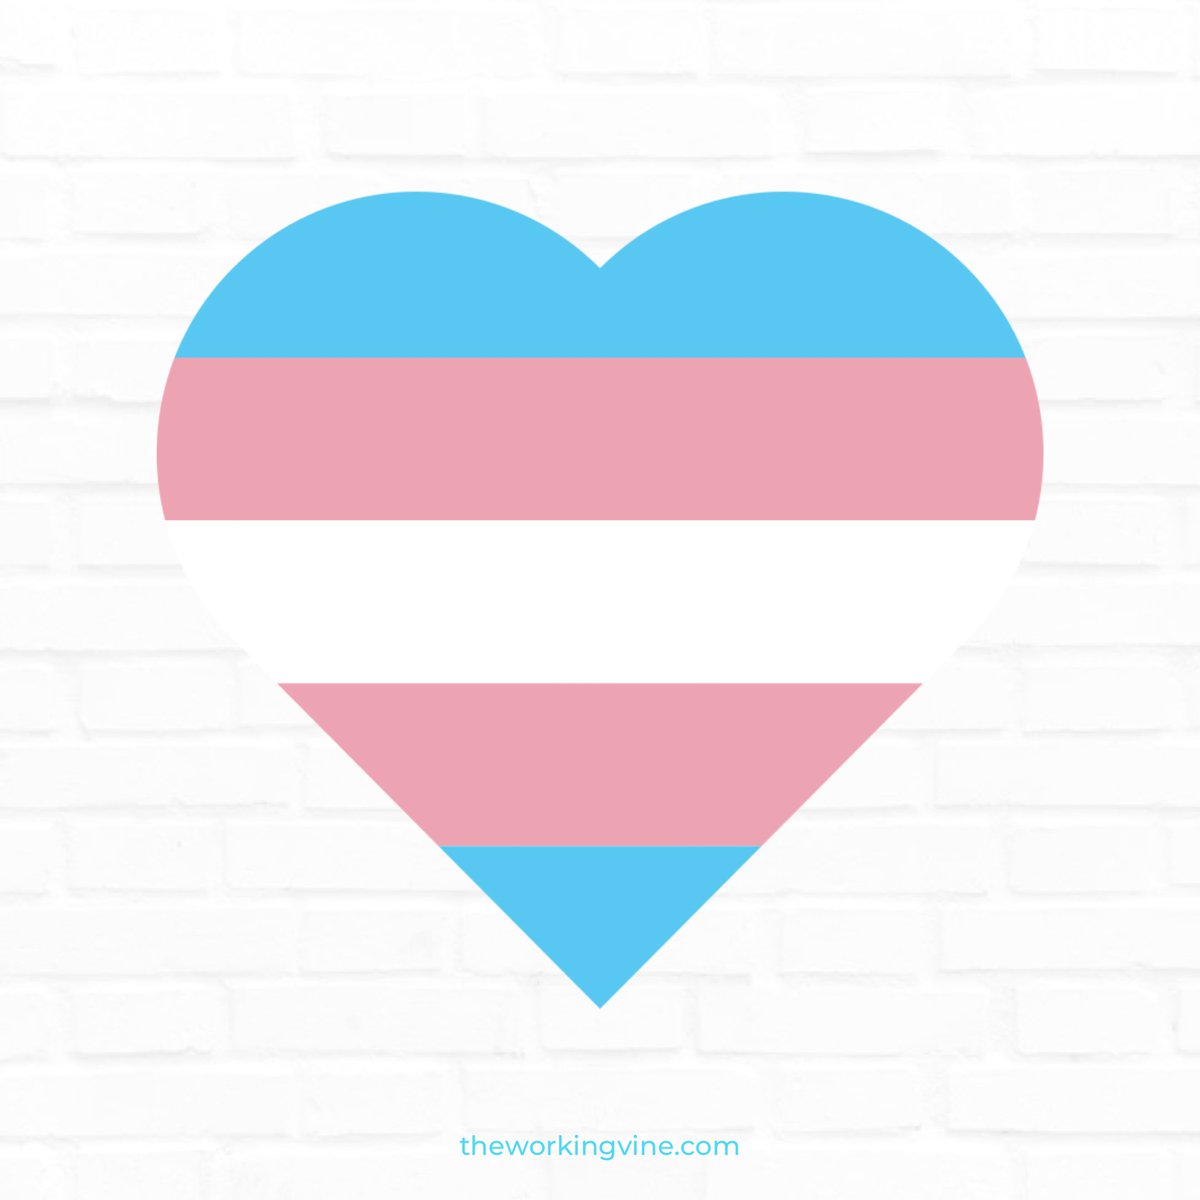 March 31st International Day of Transgender Visibility  🏳️‍⚧️
To our transgender and non-binary friends and family all over the globe, we see you, we hear you, we are allies!

#transgenderrights  #internationaldayoftransgendervisibility #weareallies